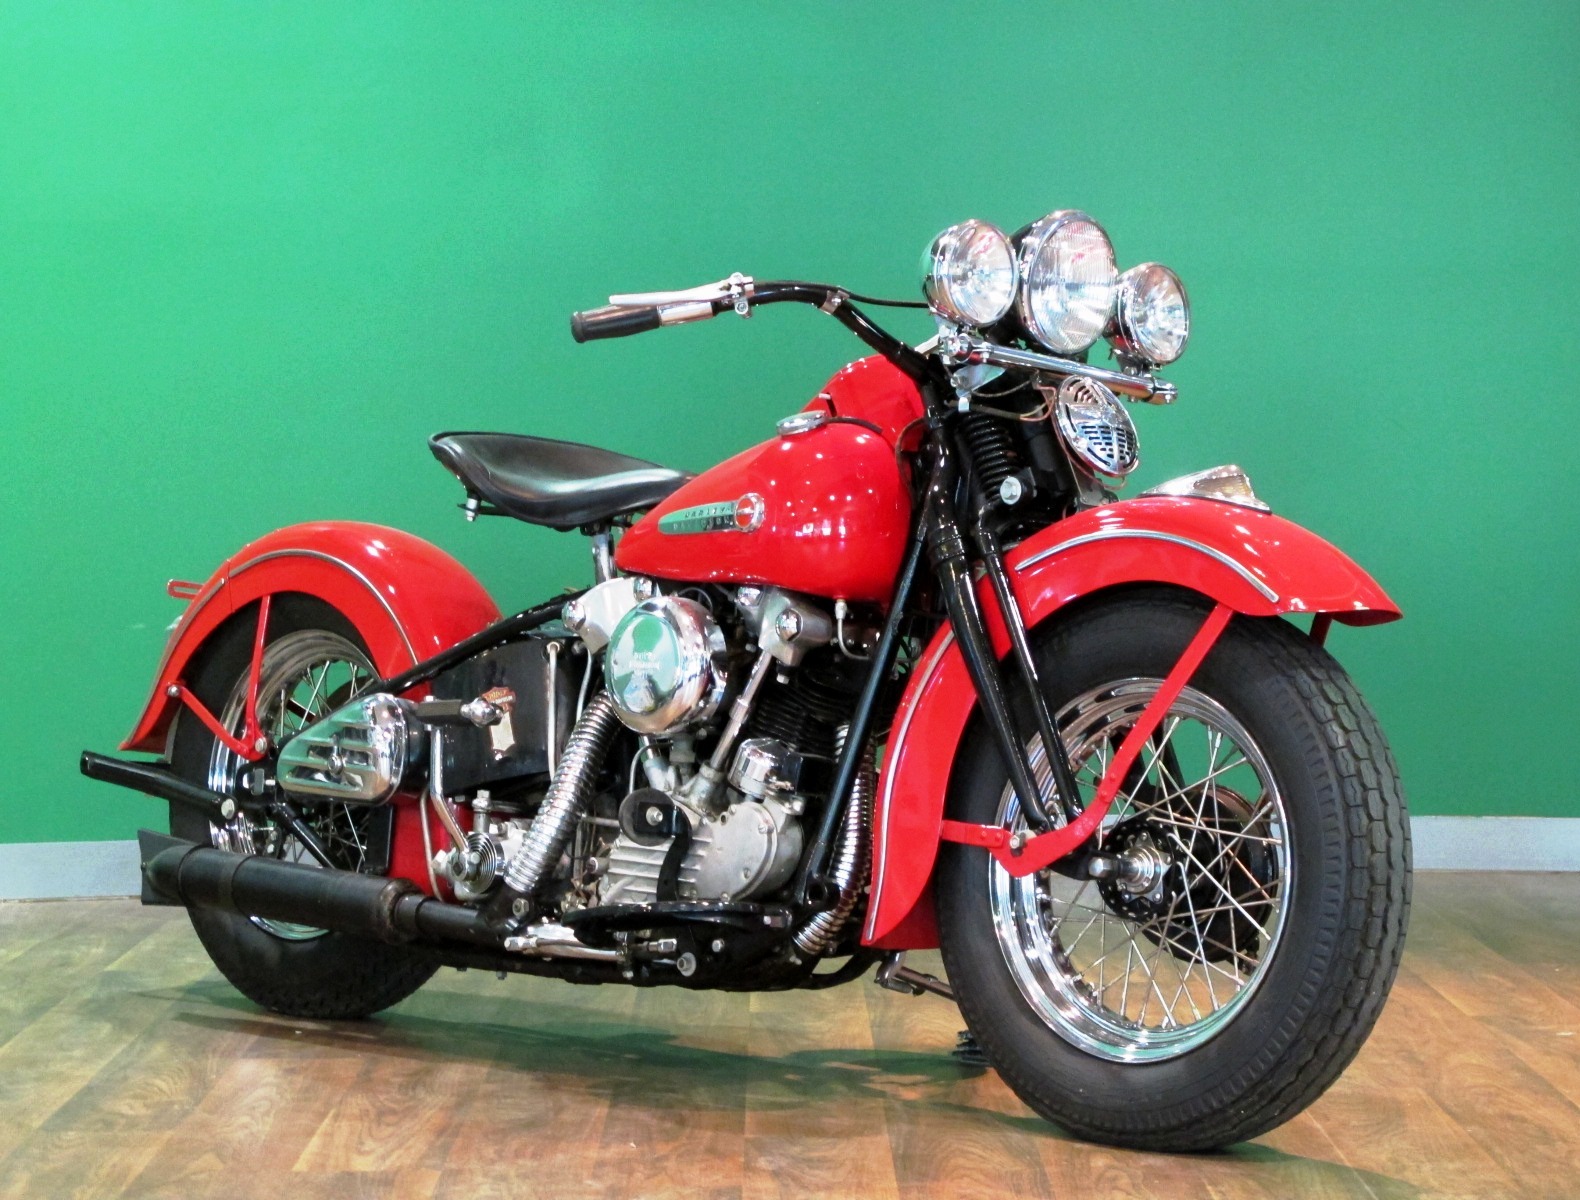 Shannons Leads Motorcycle Auction Pack In 2014